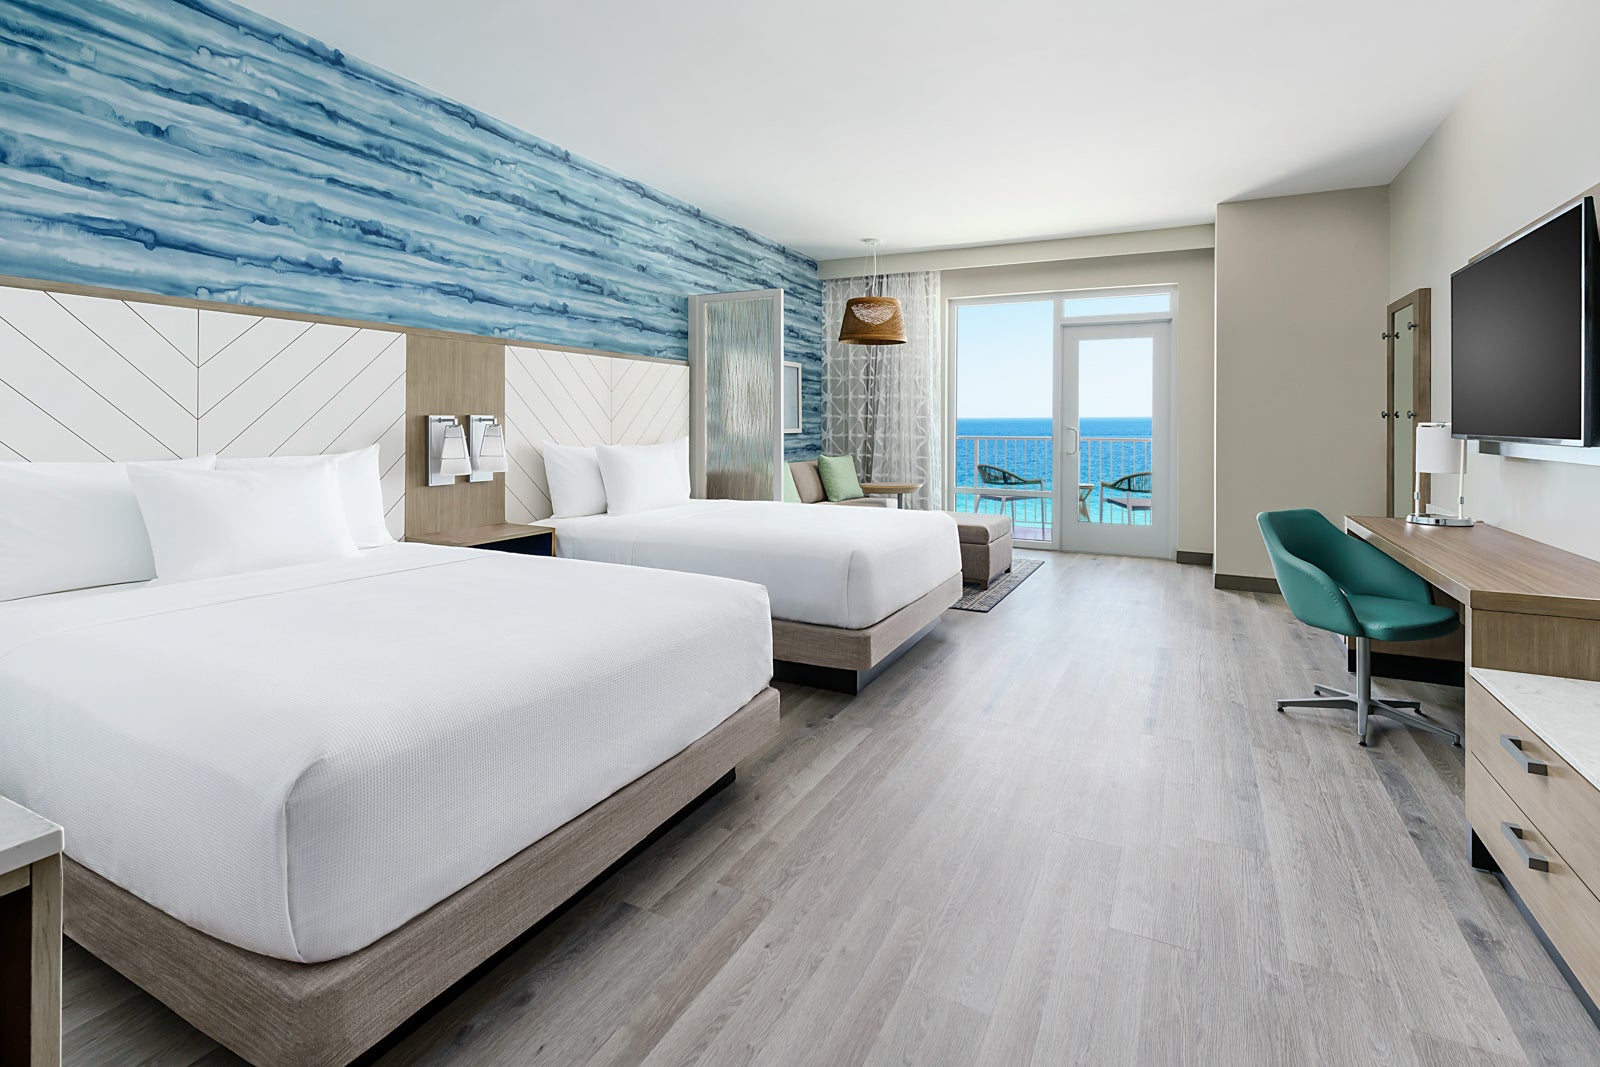 A hotel room decorated in shades of blue and white with two beds and a view of the ocean.